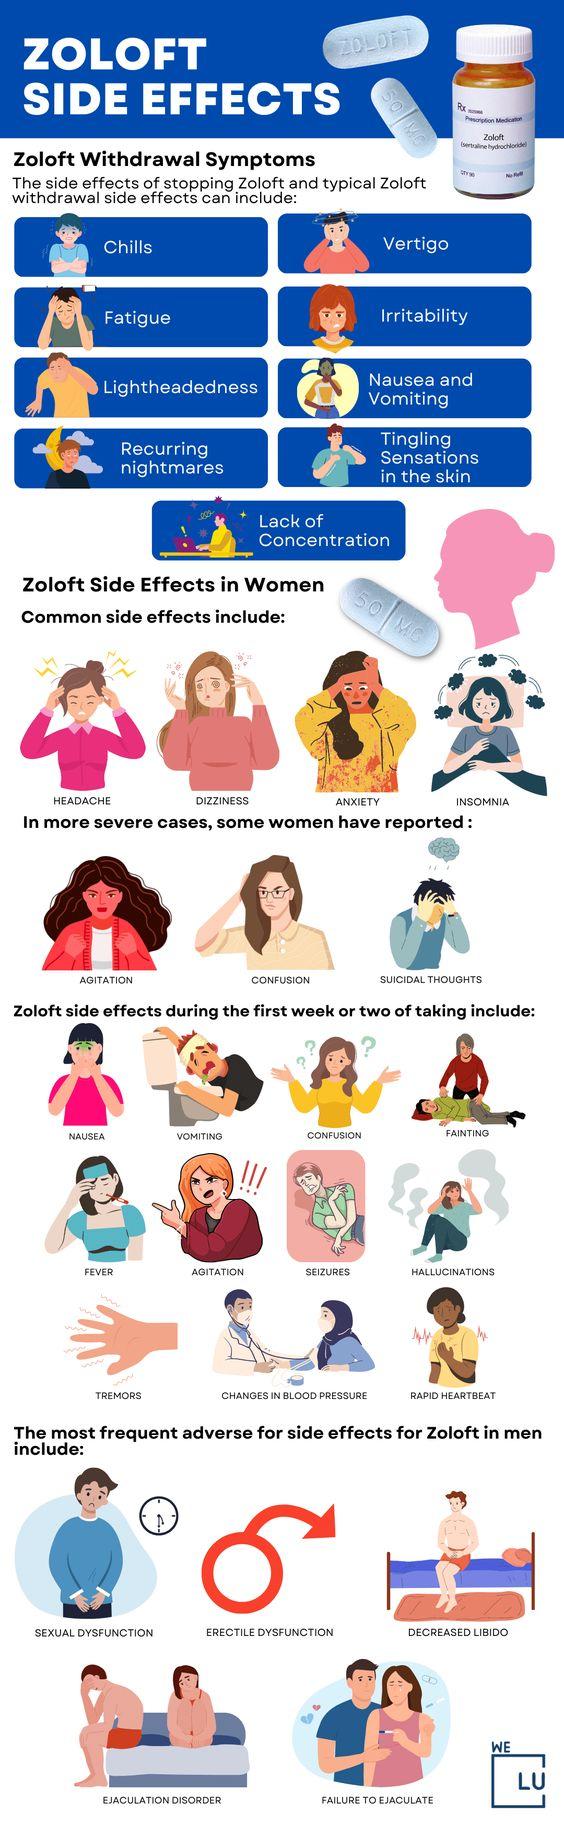 Above is the Infographic: Zoloft Side Effects In Women. There are some serious Zoloft side effects to be aware of if you take this drug. Discover the dangers of Zoloft withdrawal, Zoloft overdose, and treatment options available to you or your loved one struggling with Zoloft addiction.